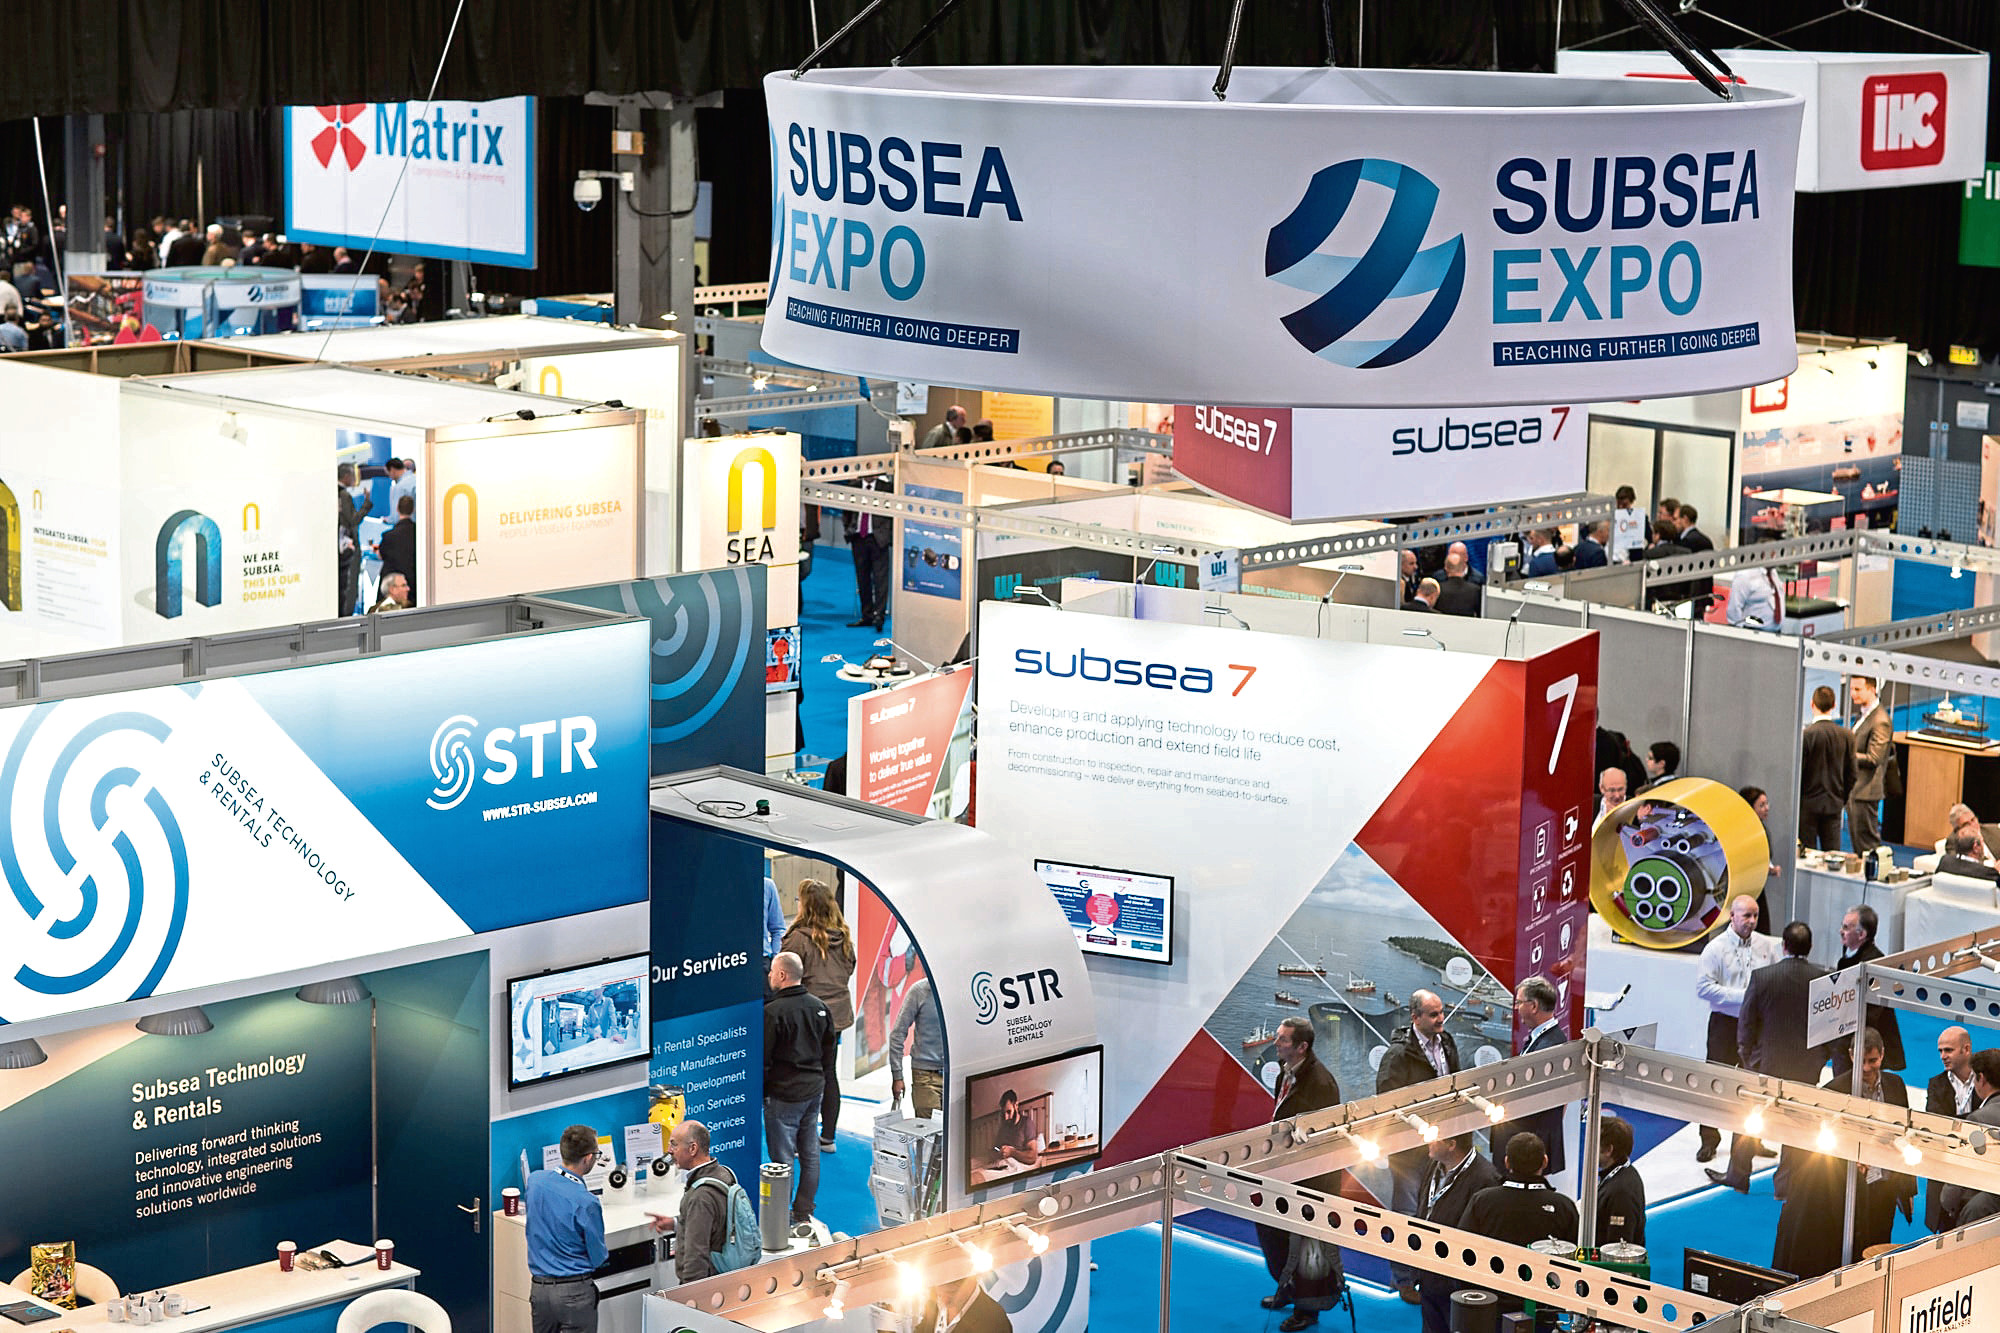 Pictured is the Subsea expo conference, taken with permission from a press release.